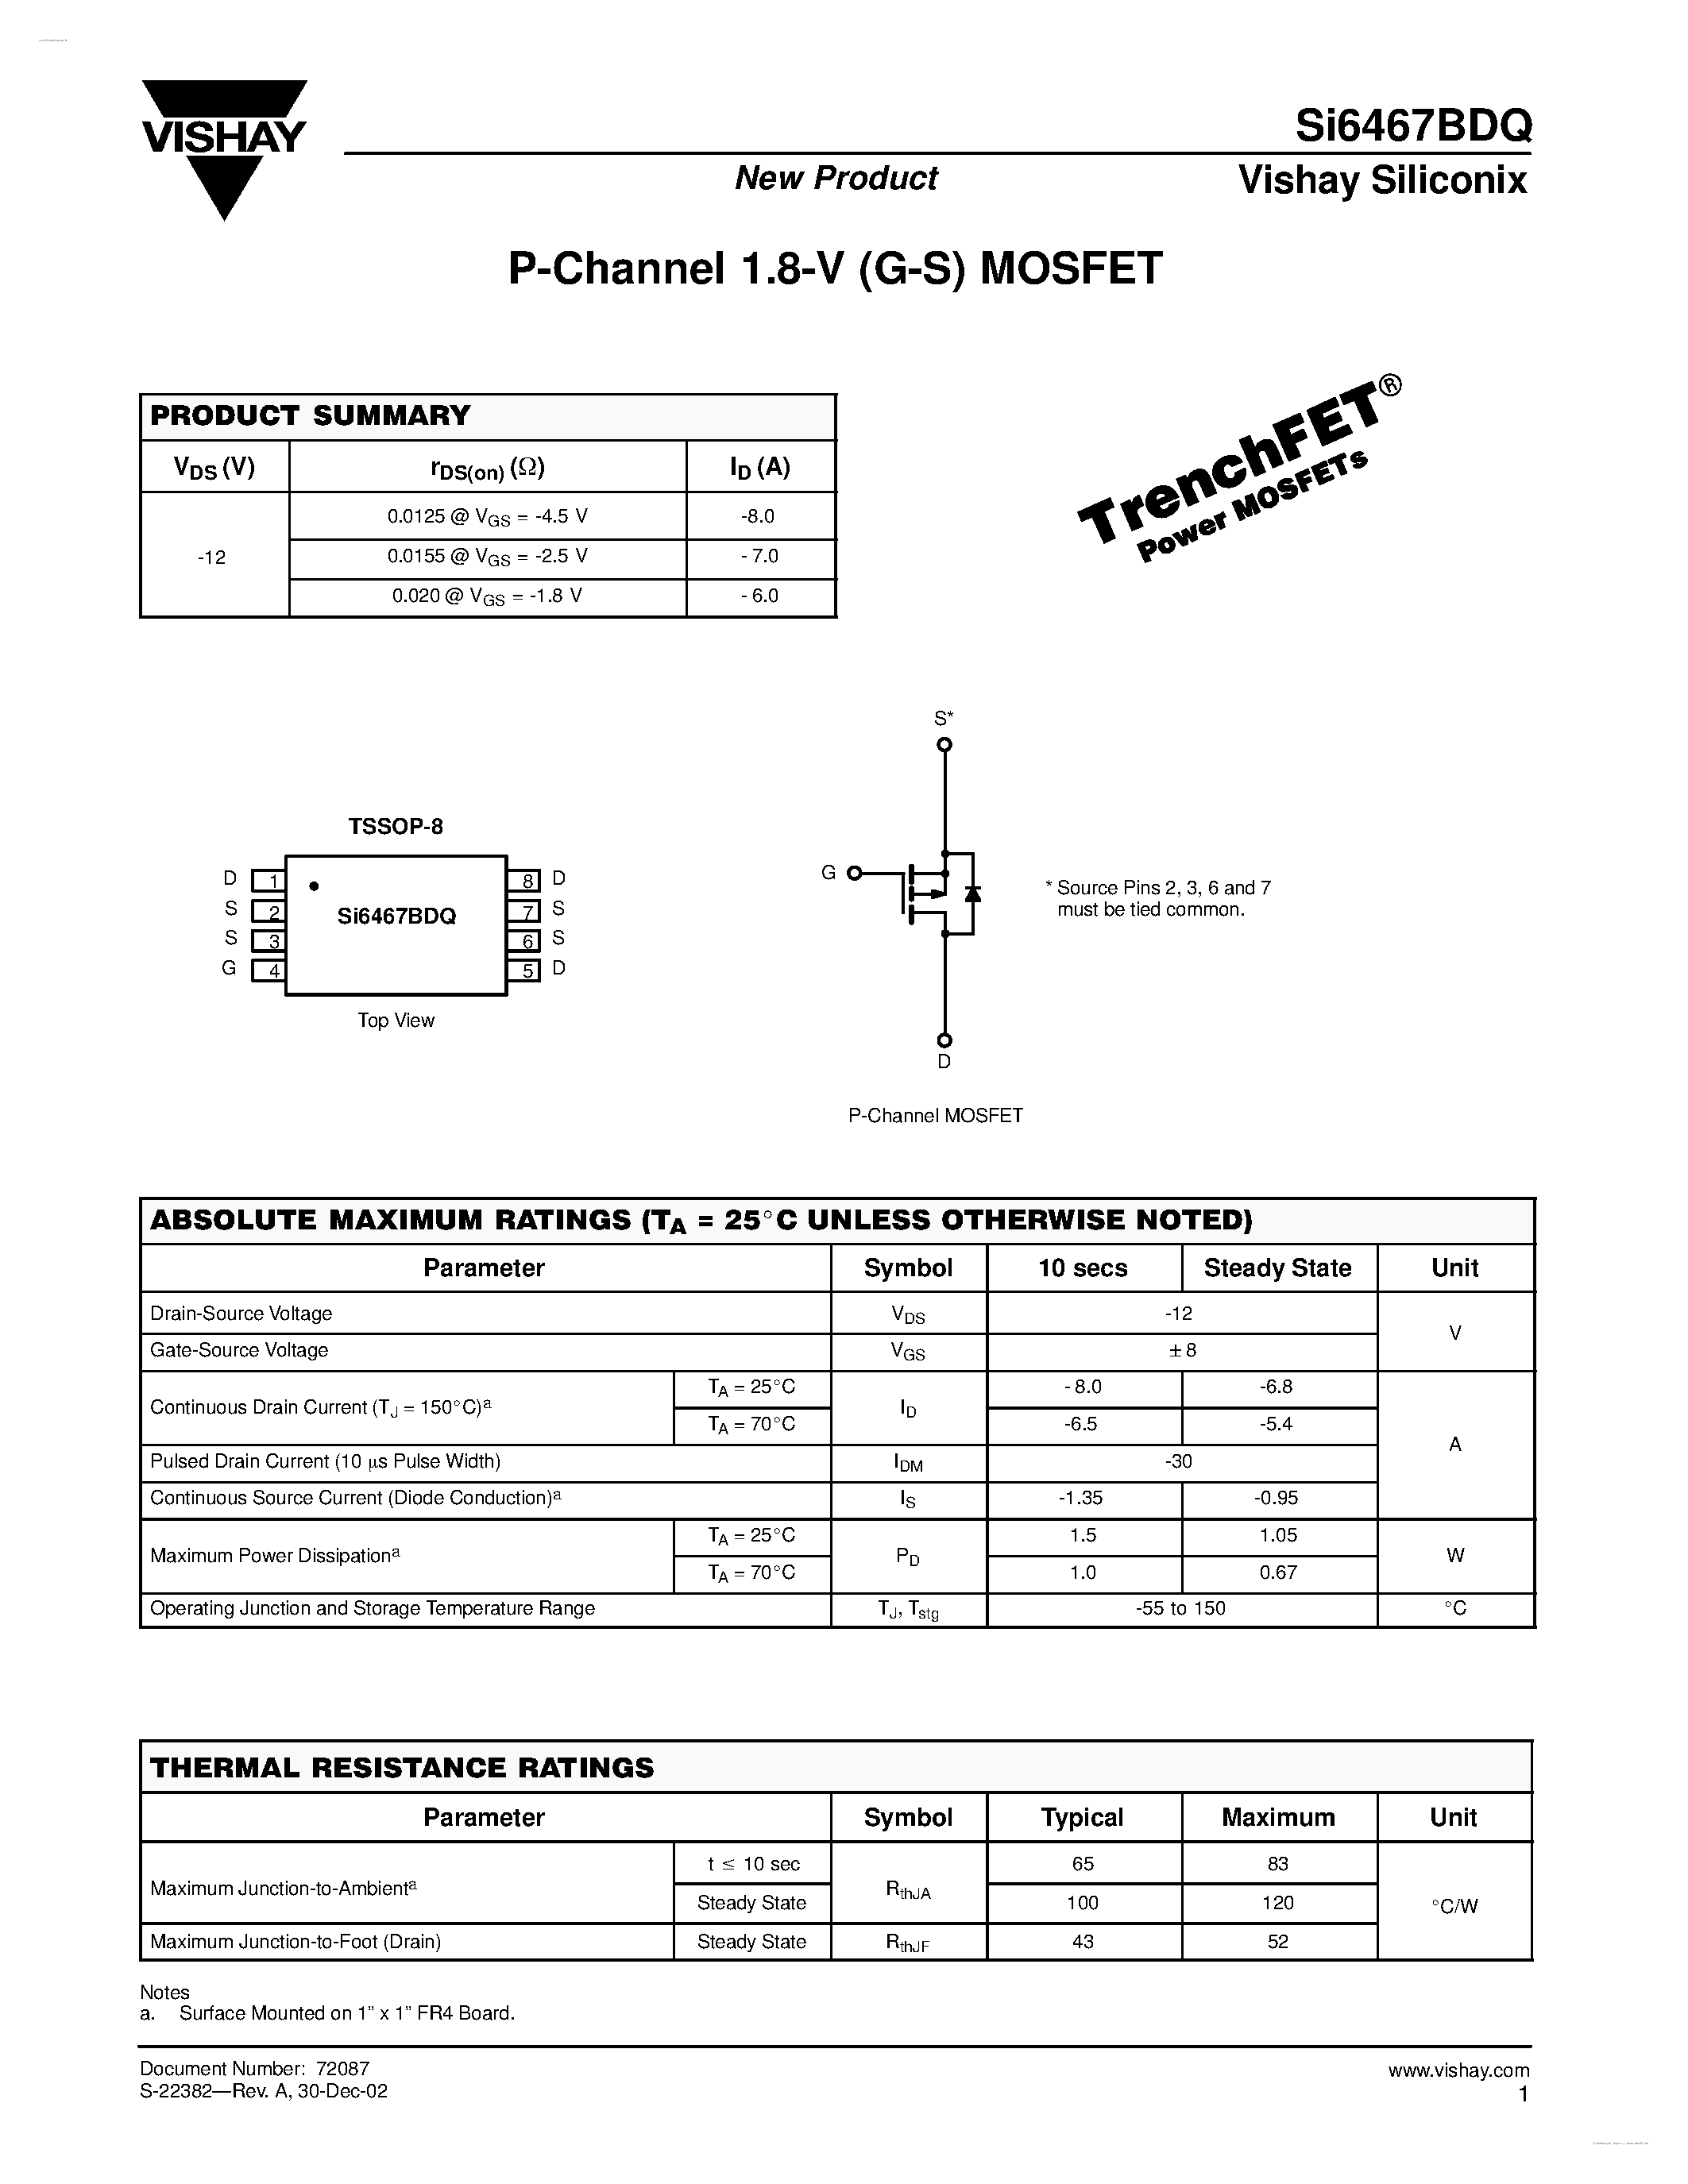 Datasheet SI6467BDQ - P-Channel 1.8-V (G-S) MOSFET page 1